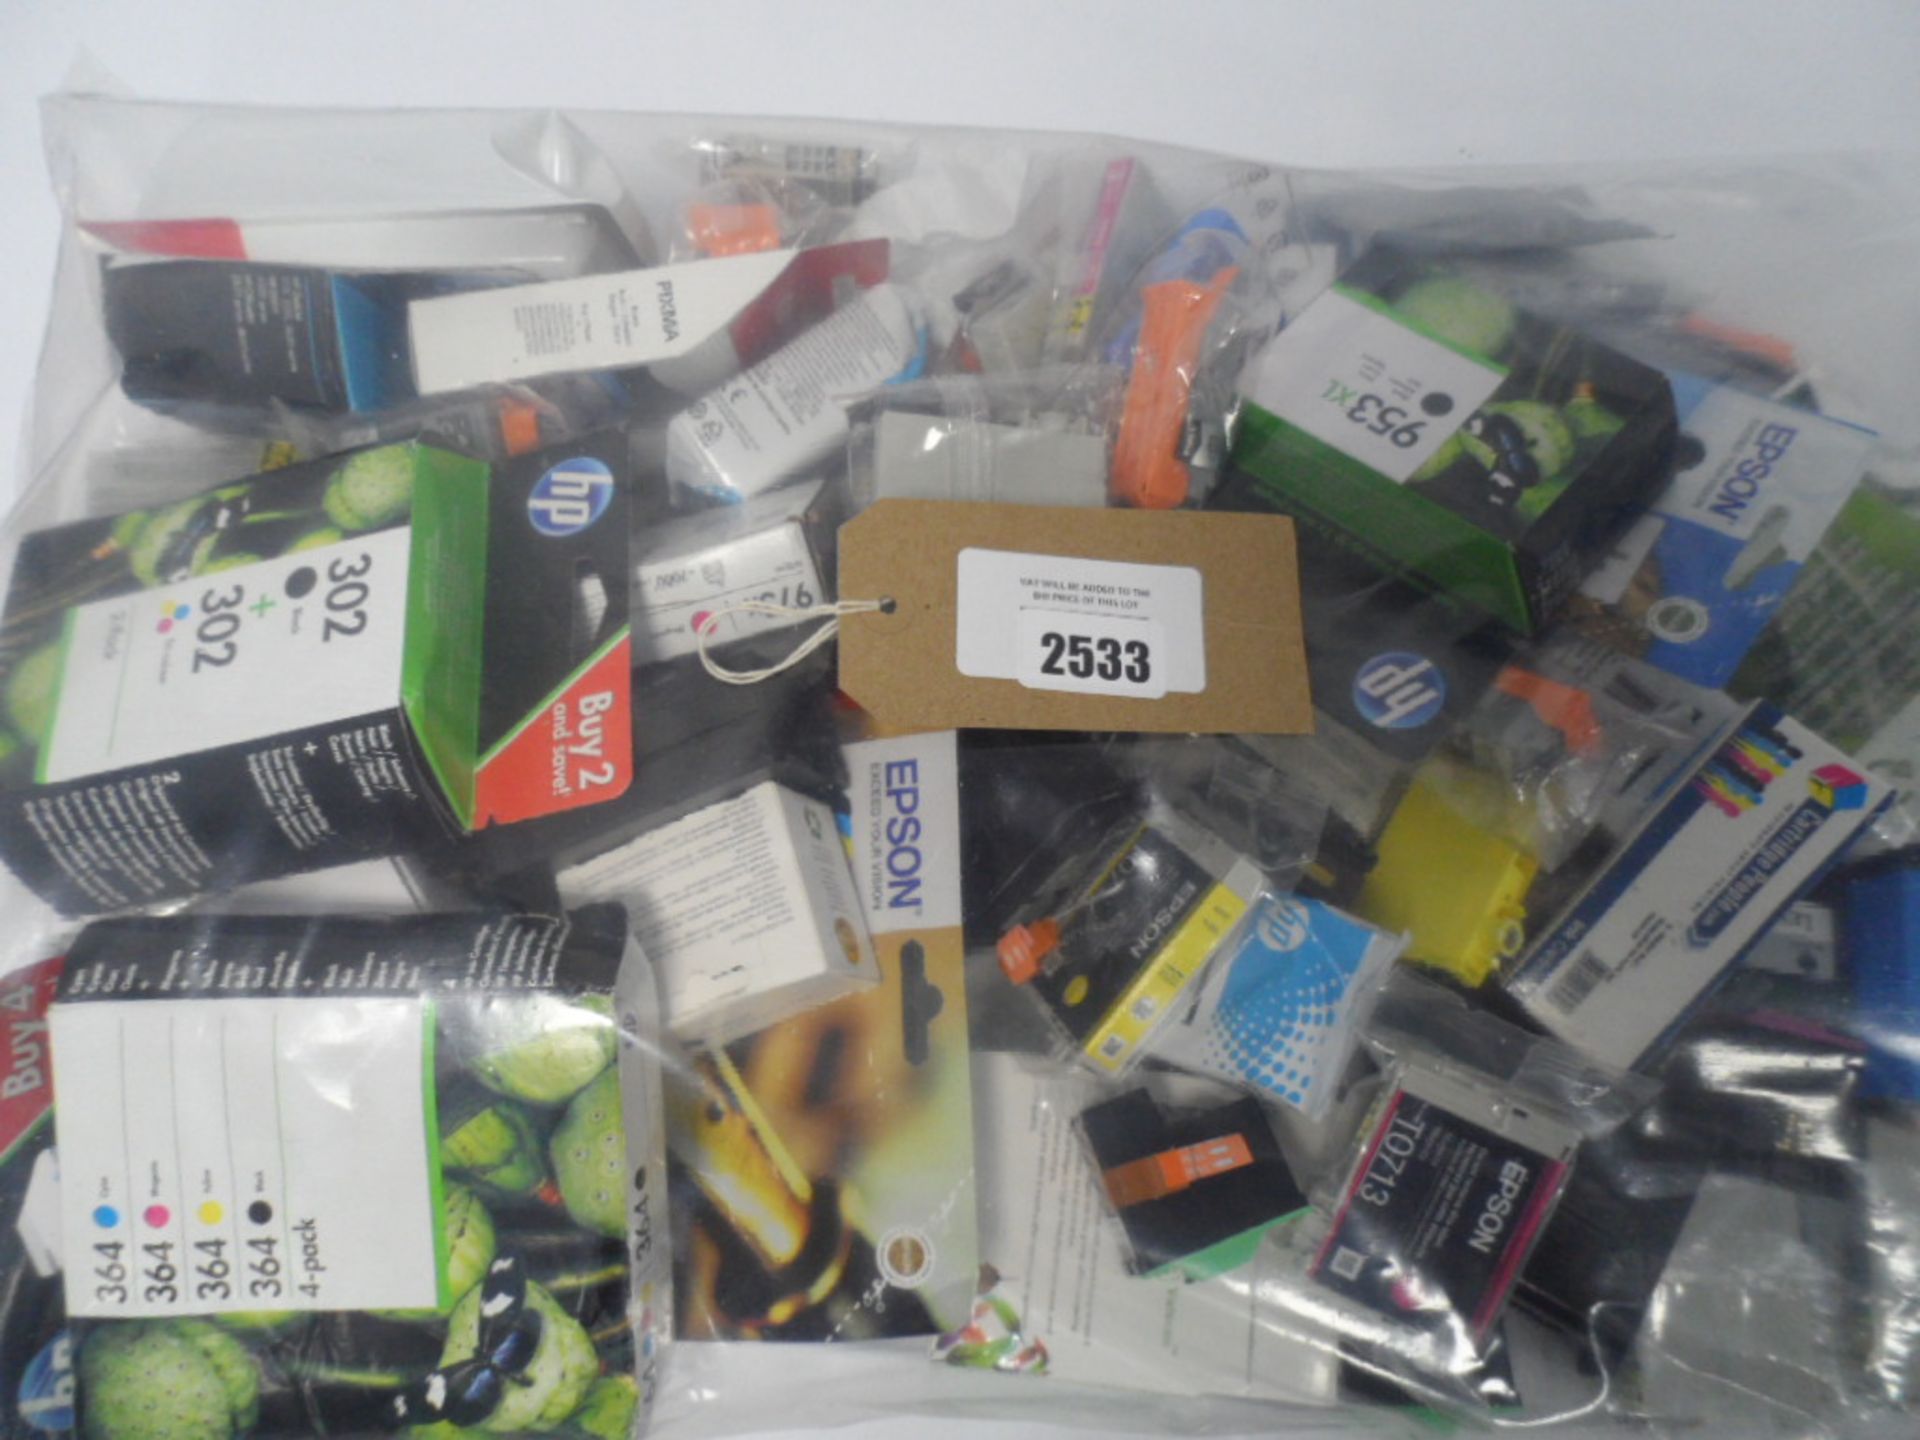 Replacement ink cartridges including Epson, HP, Canon, etc.